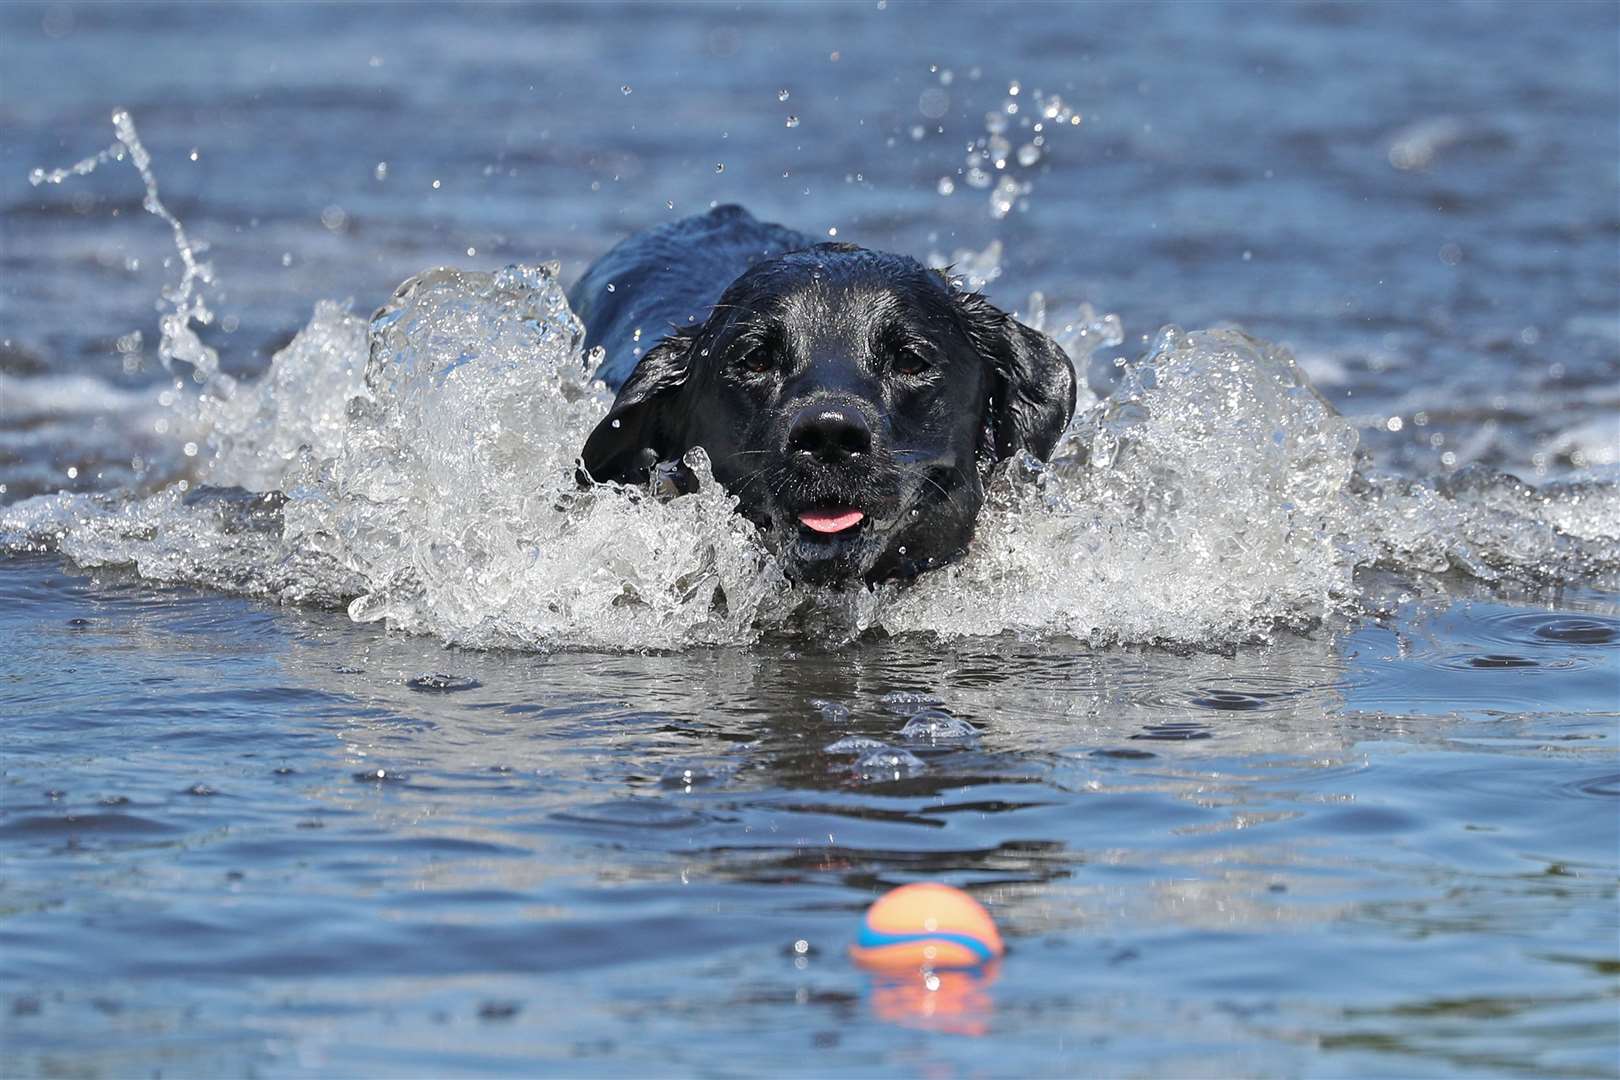 On Clapham Common in south London, Zed the black labrador cooled off with a splash into the pond (Jonathan Brady/PA)